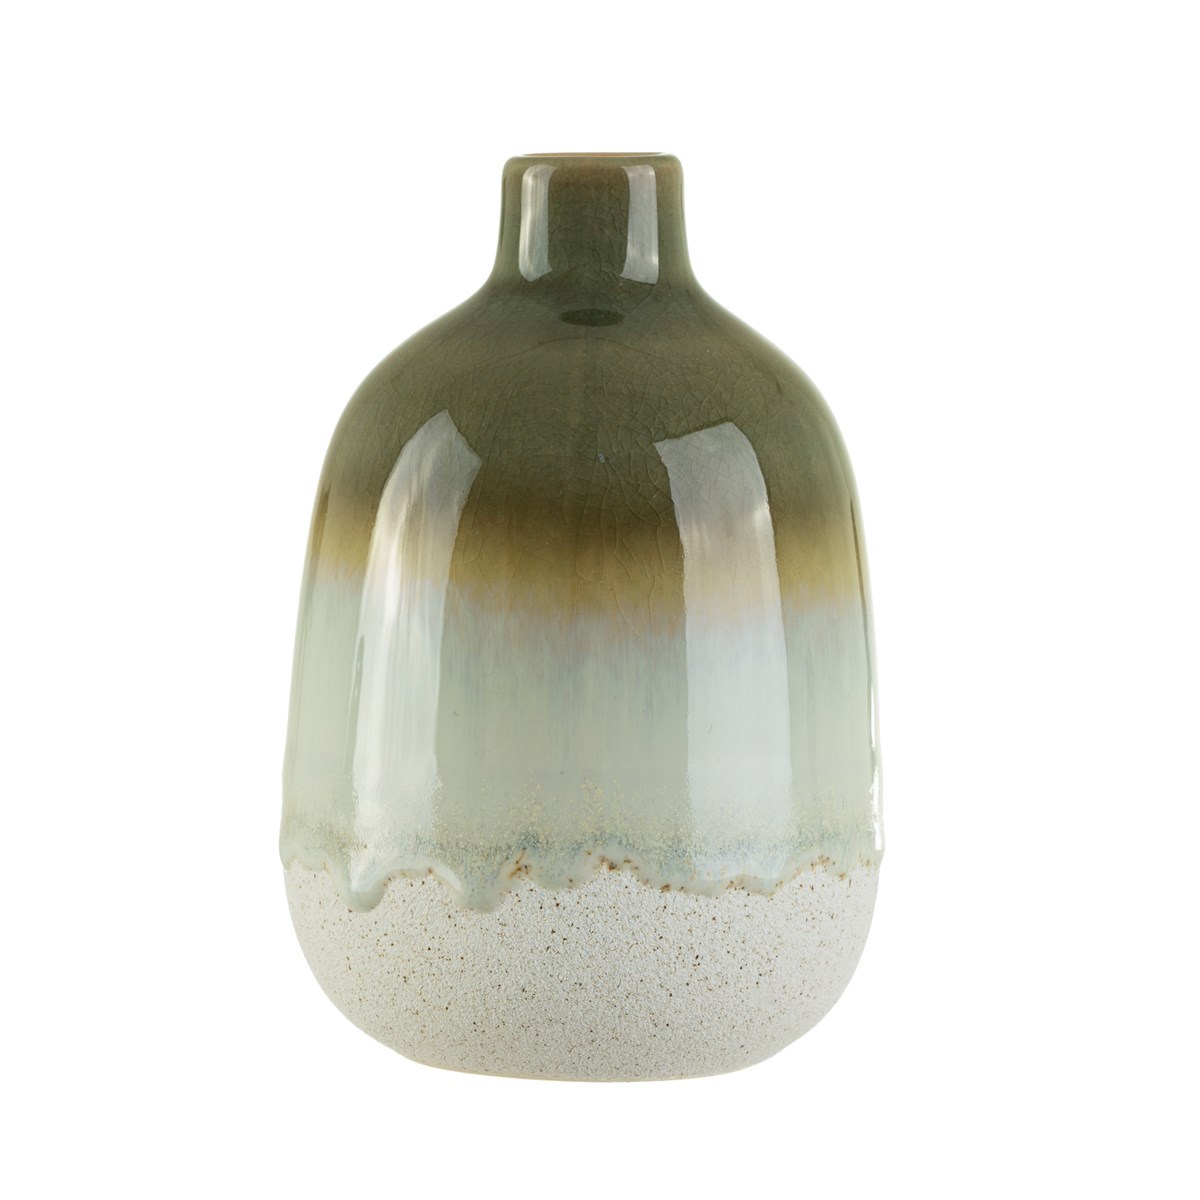 The Forest & Co. Green And White Ombre Mini Vase